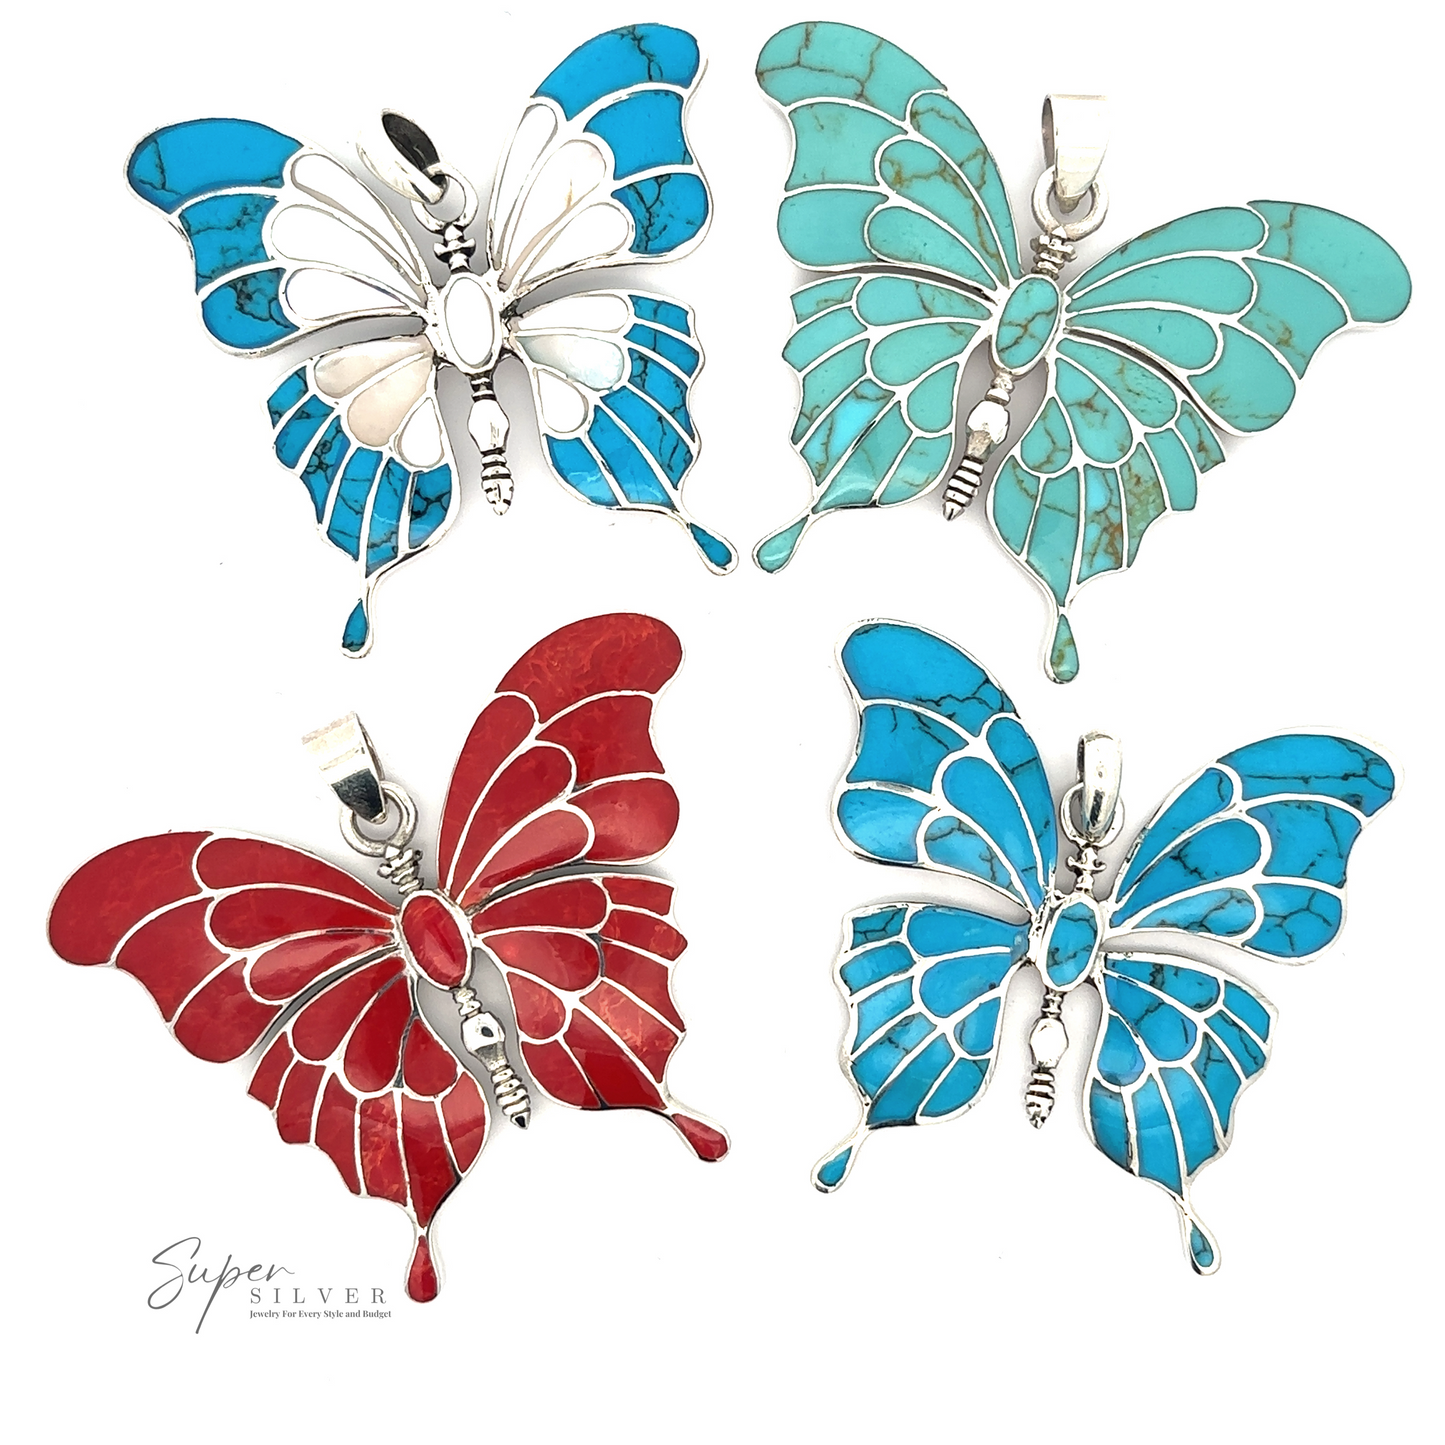 Four Stunning Inlay Butterfly Pendants in different colors (blue, turquoise, red, and white) with sterling silver outlines arranged in a 2x2 grid on a white background.